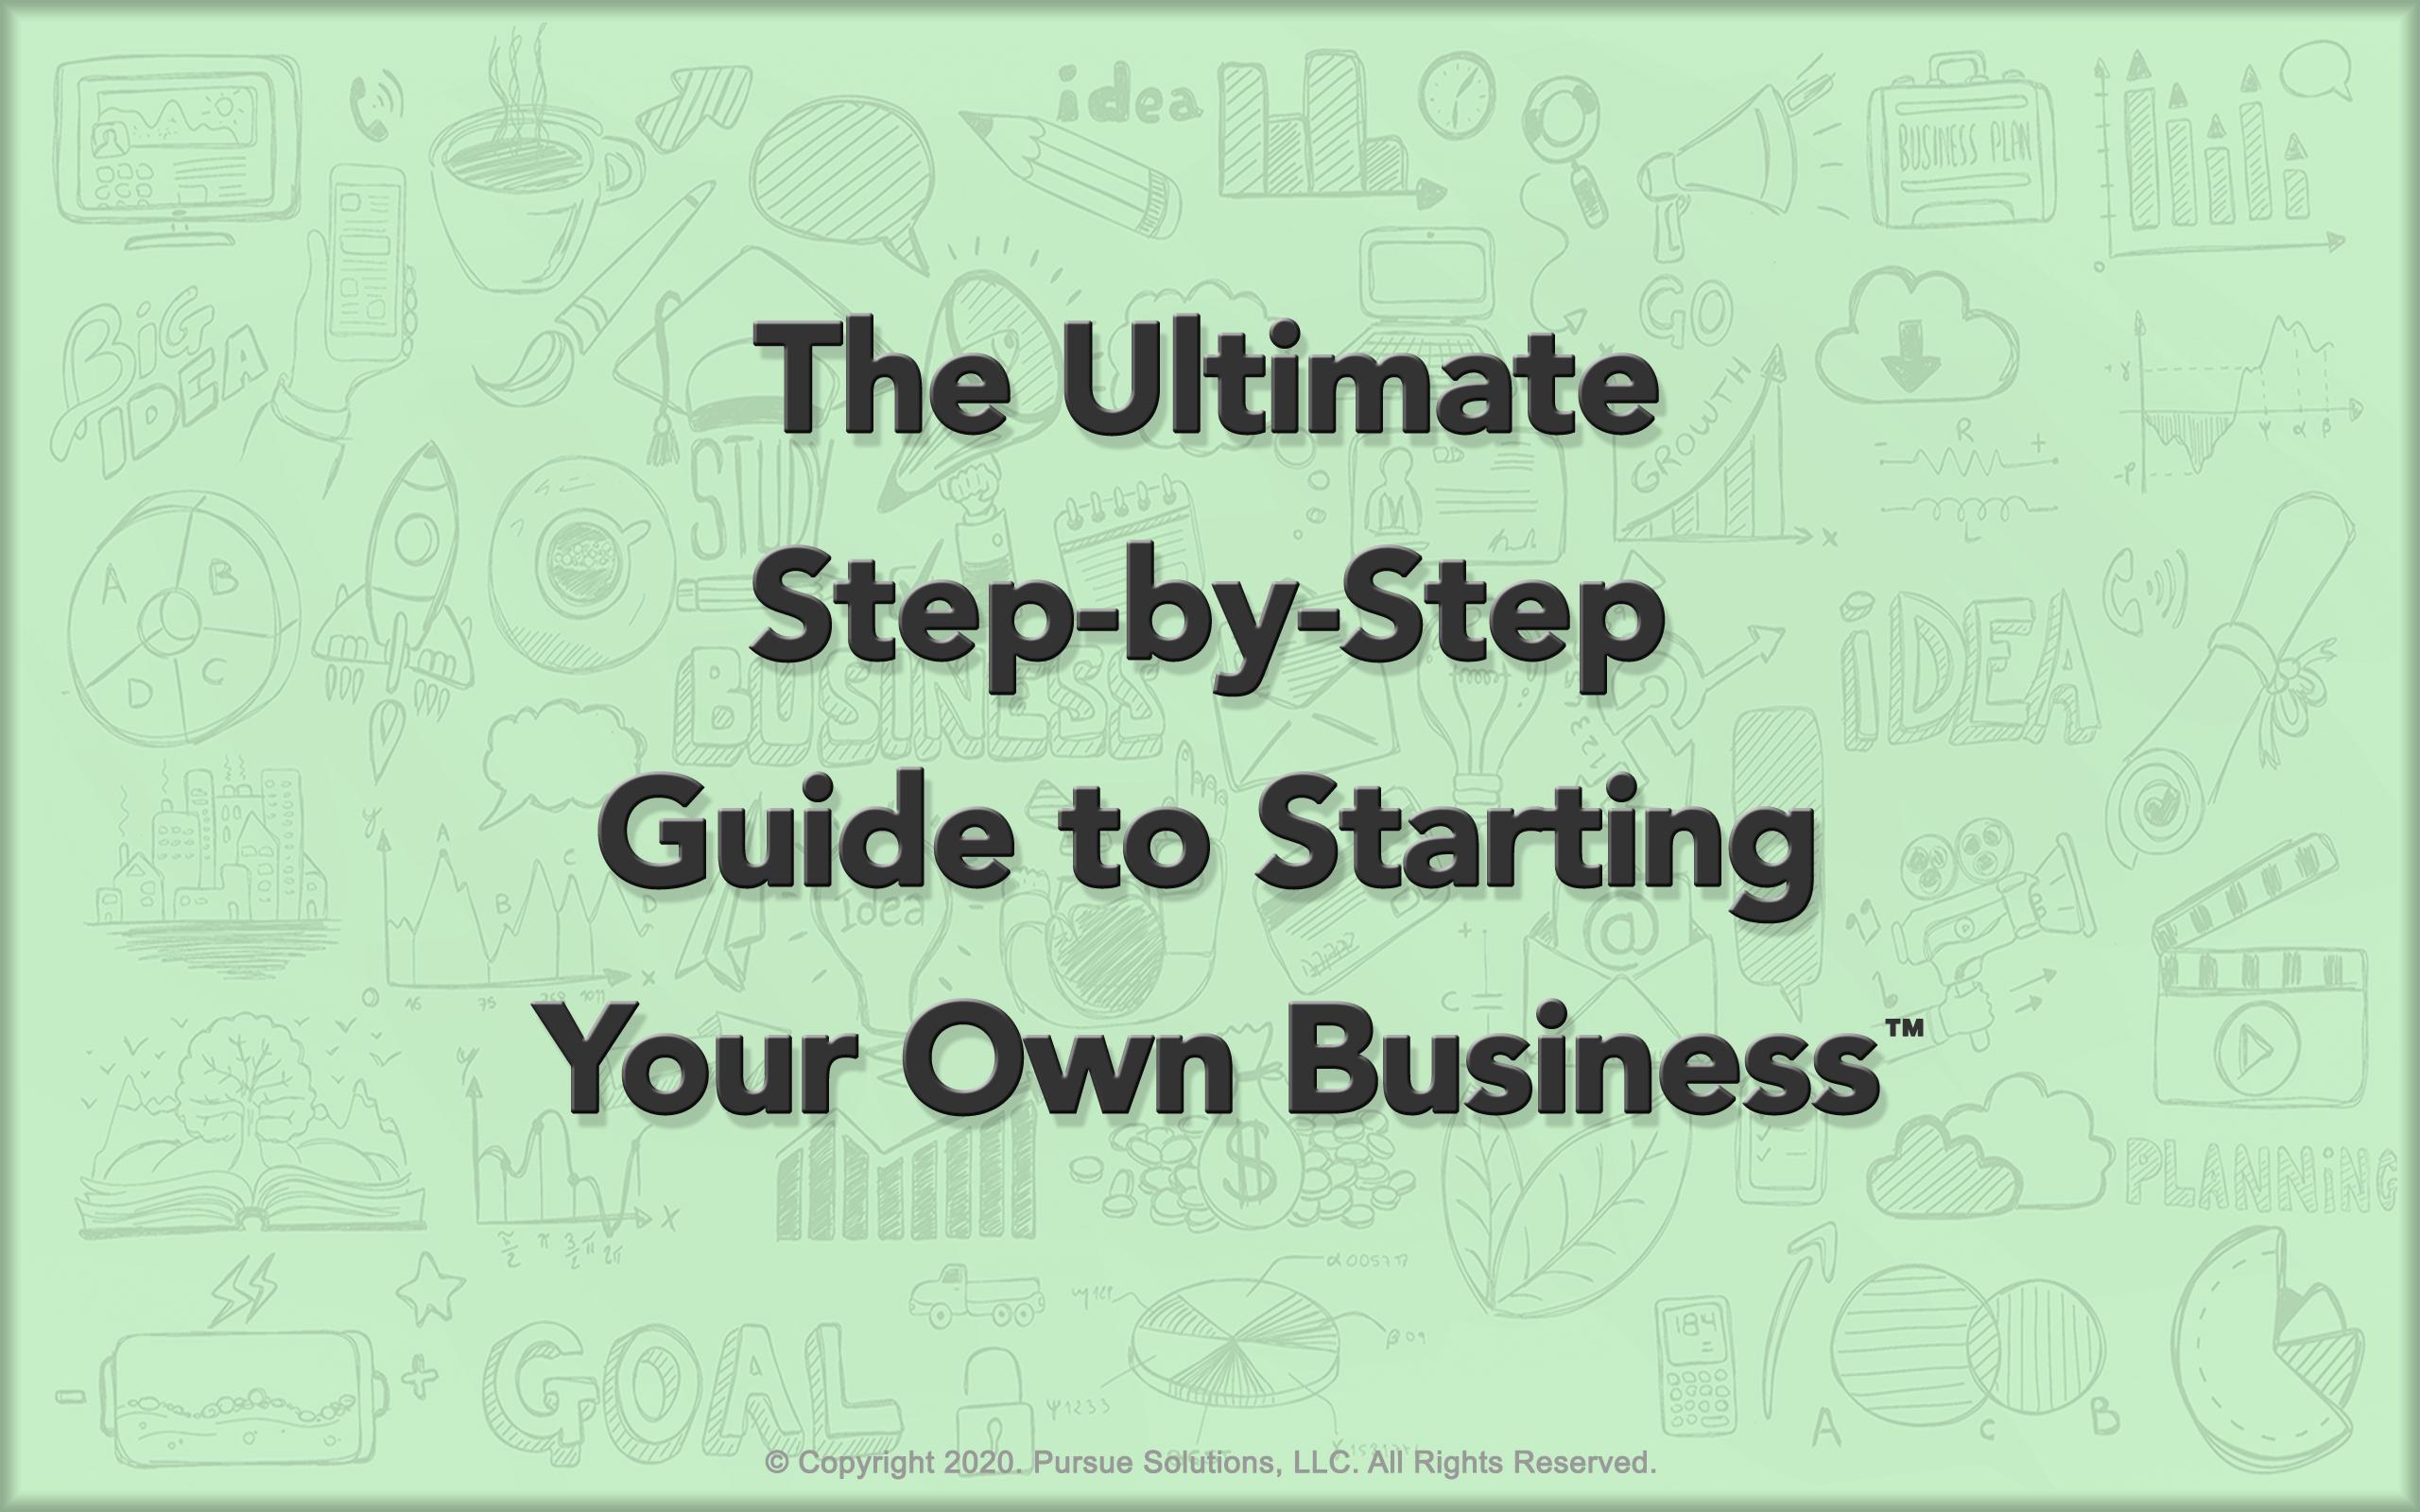 The Ultimate Step-by-Step Guide to Starting Your Own Business™ Course